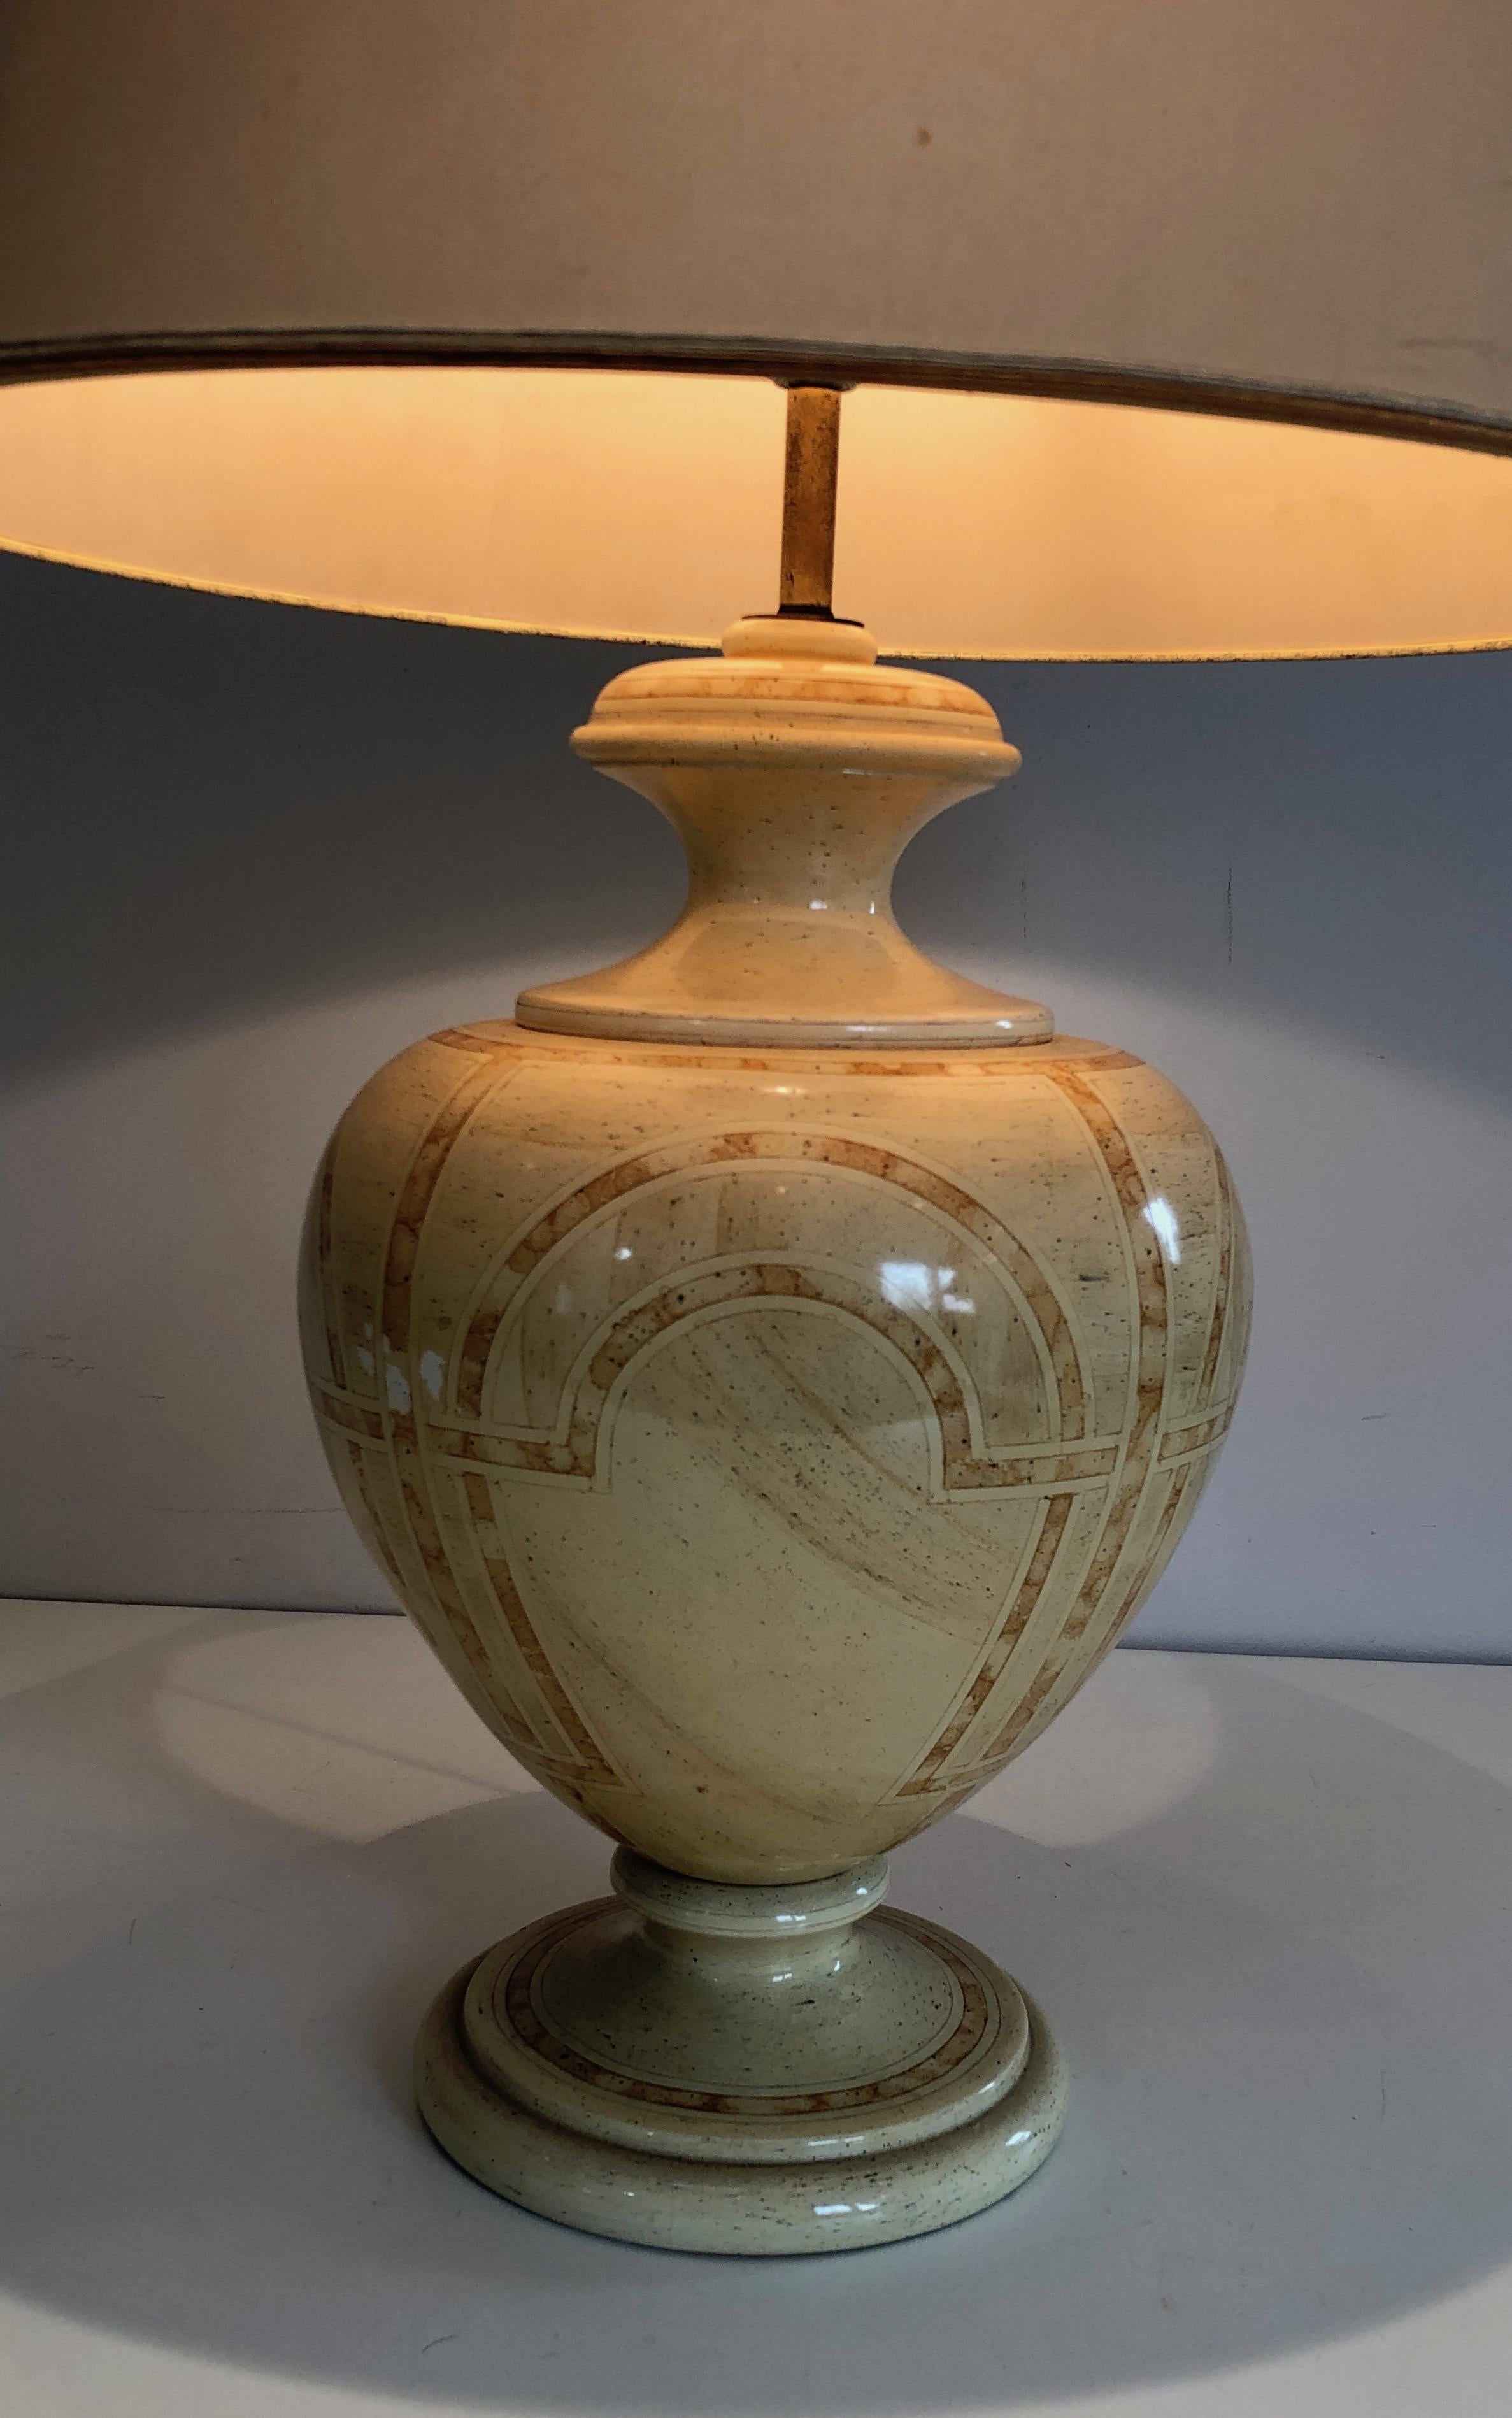 Late 20th Century Eggshell Lacquered Table Lamp with Interlacing Decors, French Work, circa 1970 For Sale